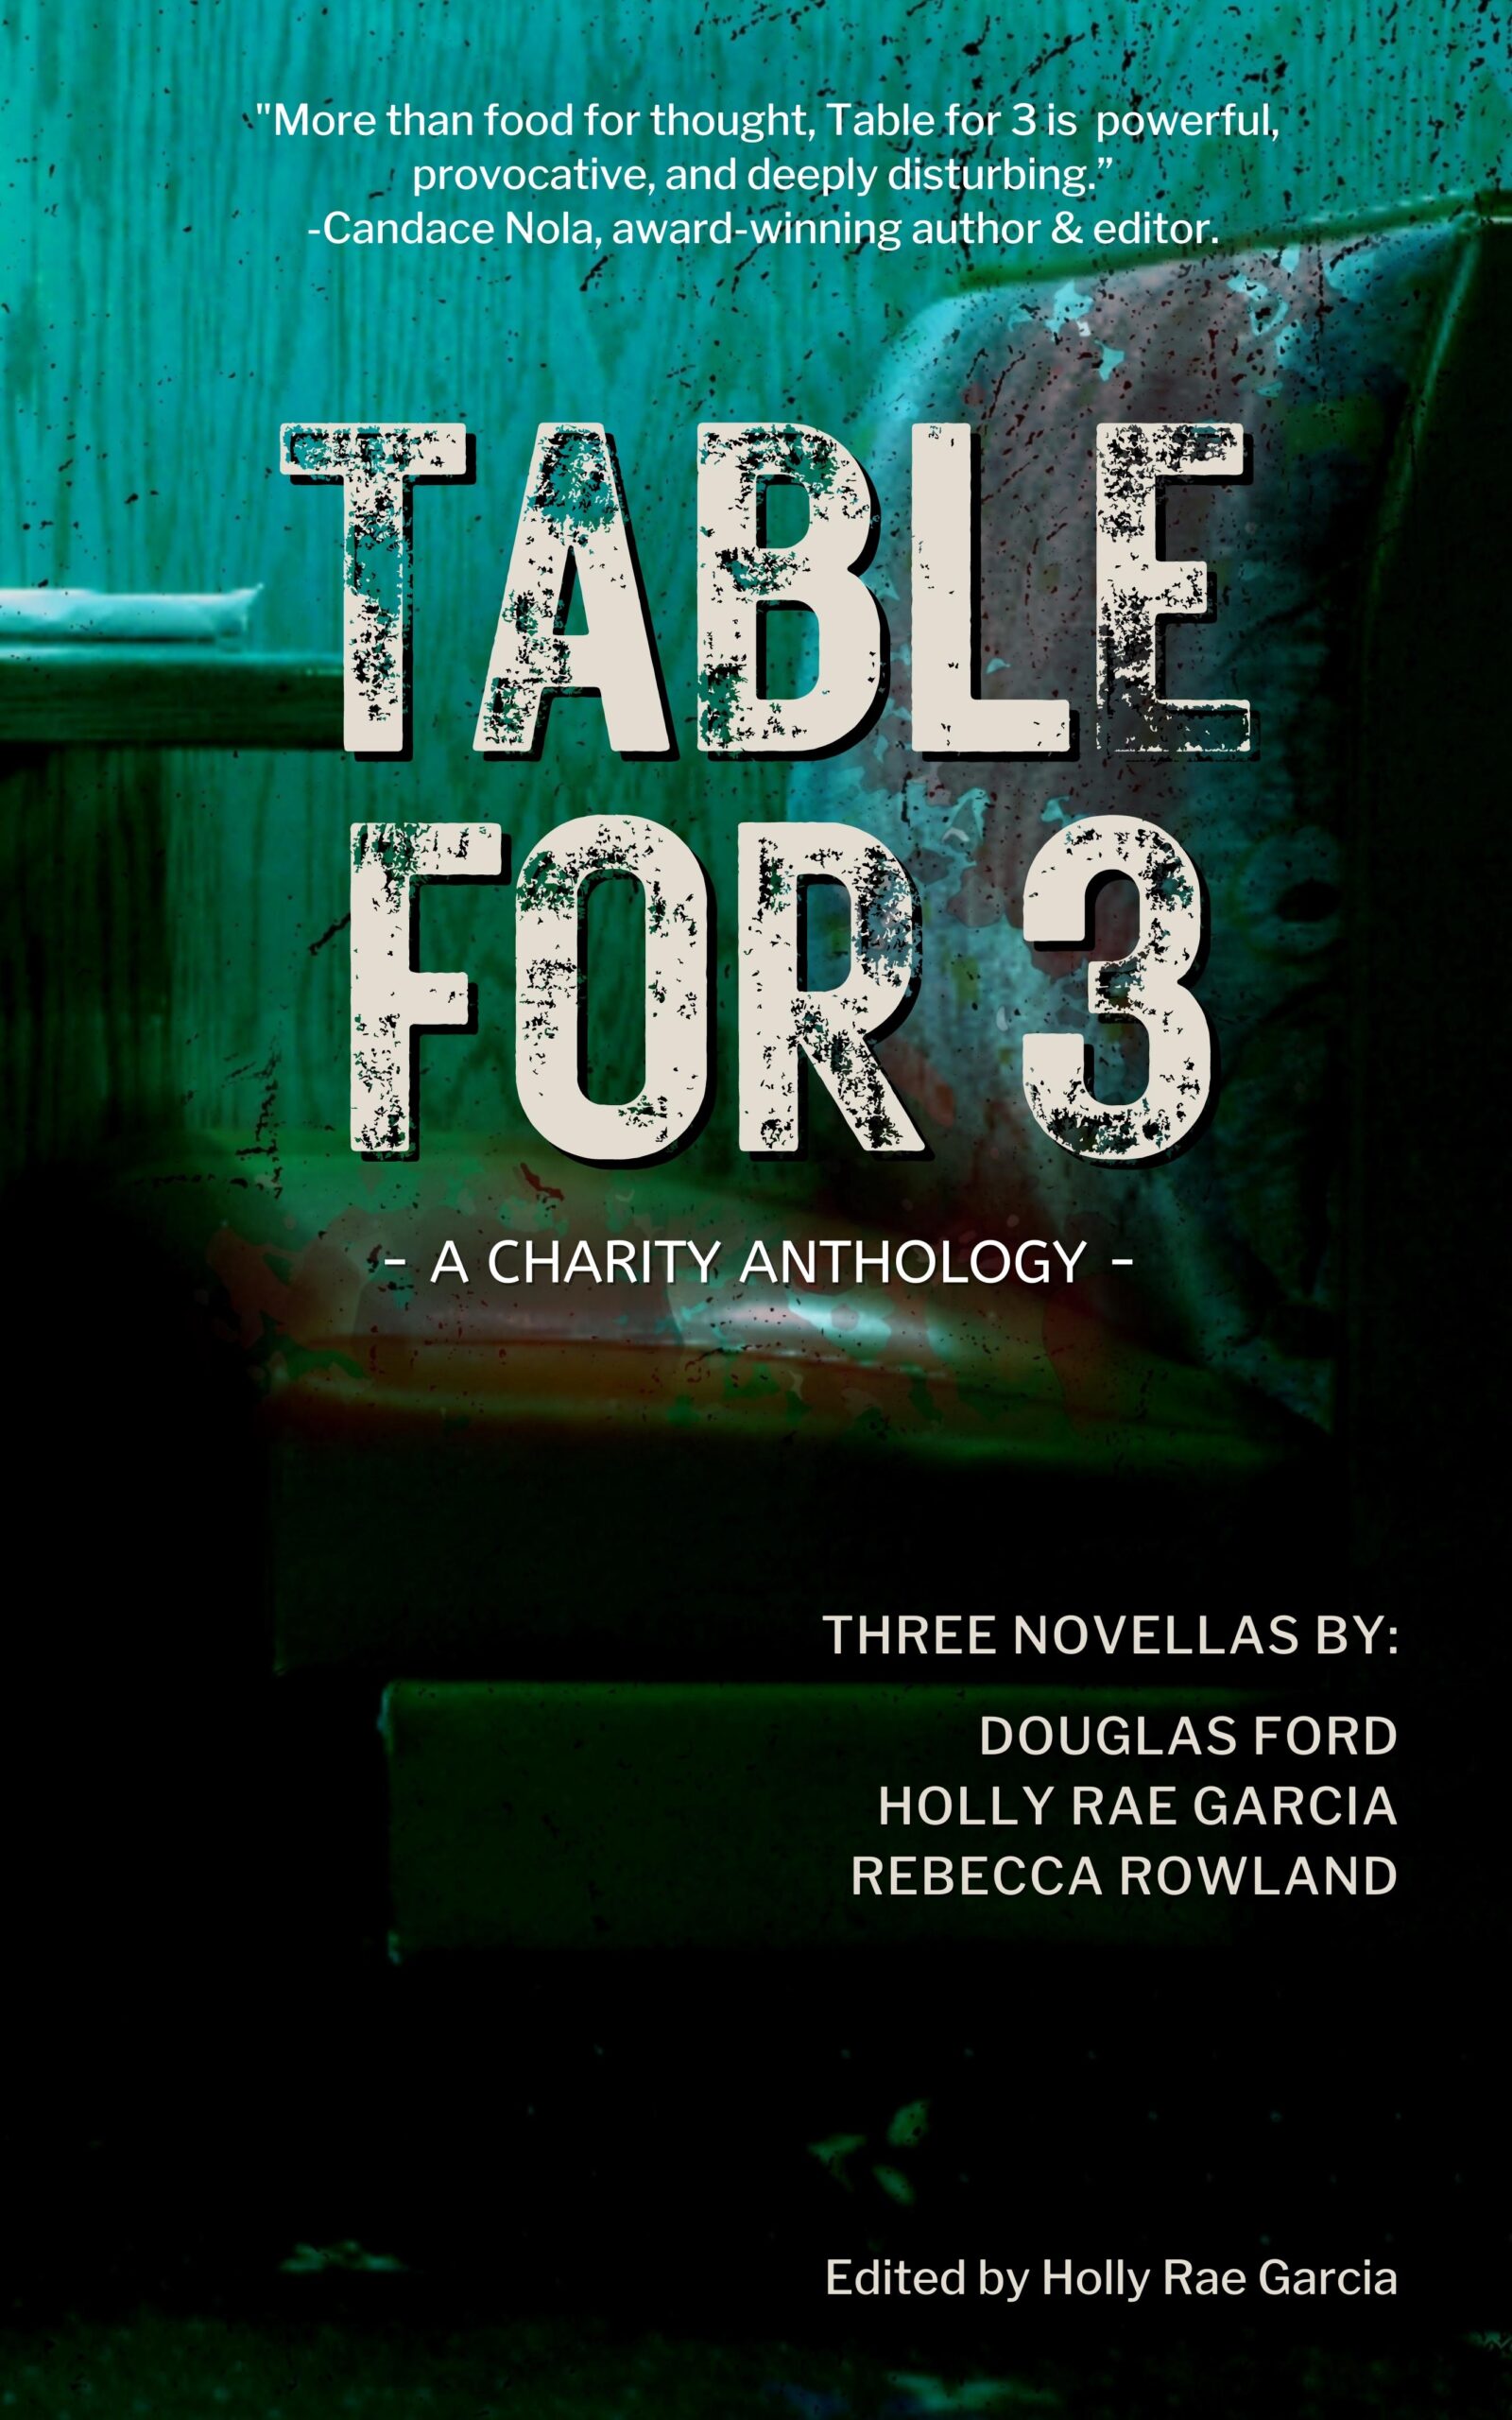 
					Cover art from "Table for 3" by 